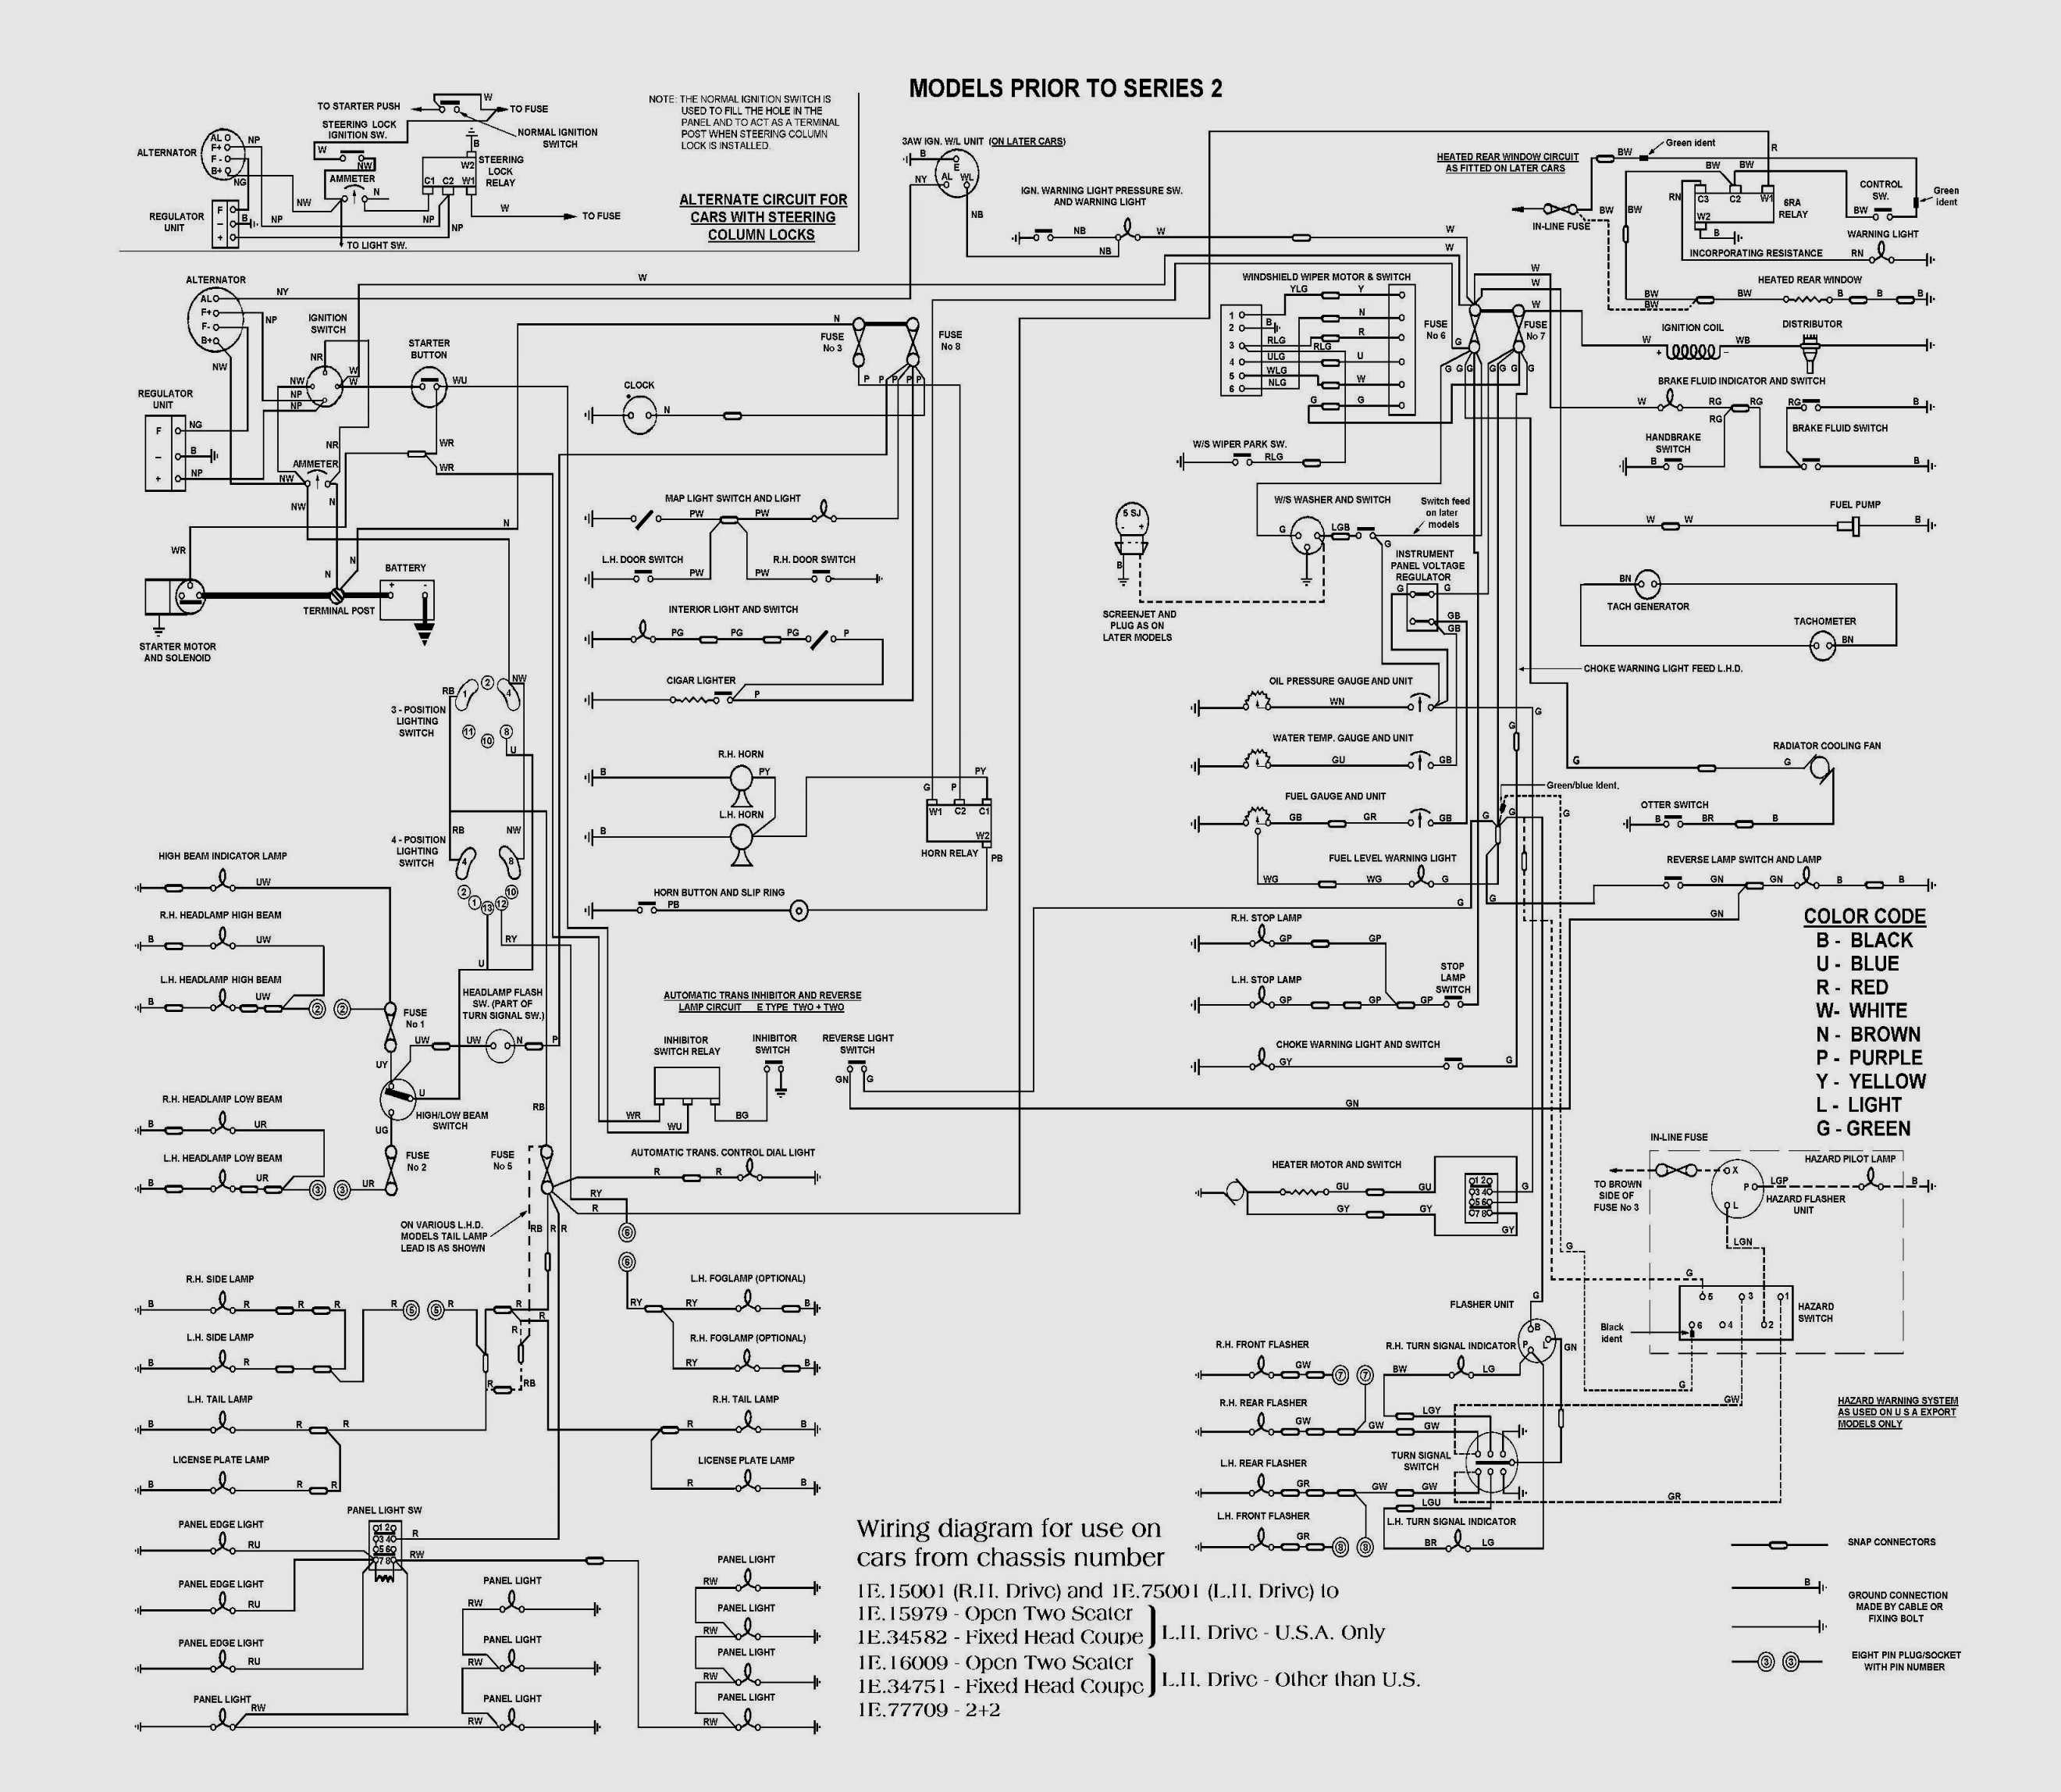 Autometer Shift Light Wiring Diagram Autometer Tach Wiring Diagram Autometer Tach Wiring Diagram with Of Autometer Shift Light Wiring Diagram